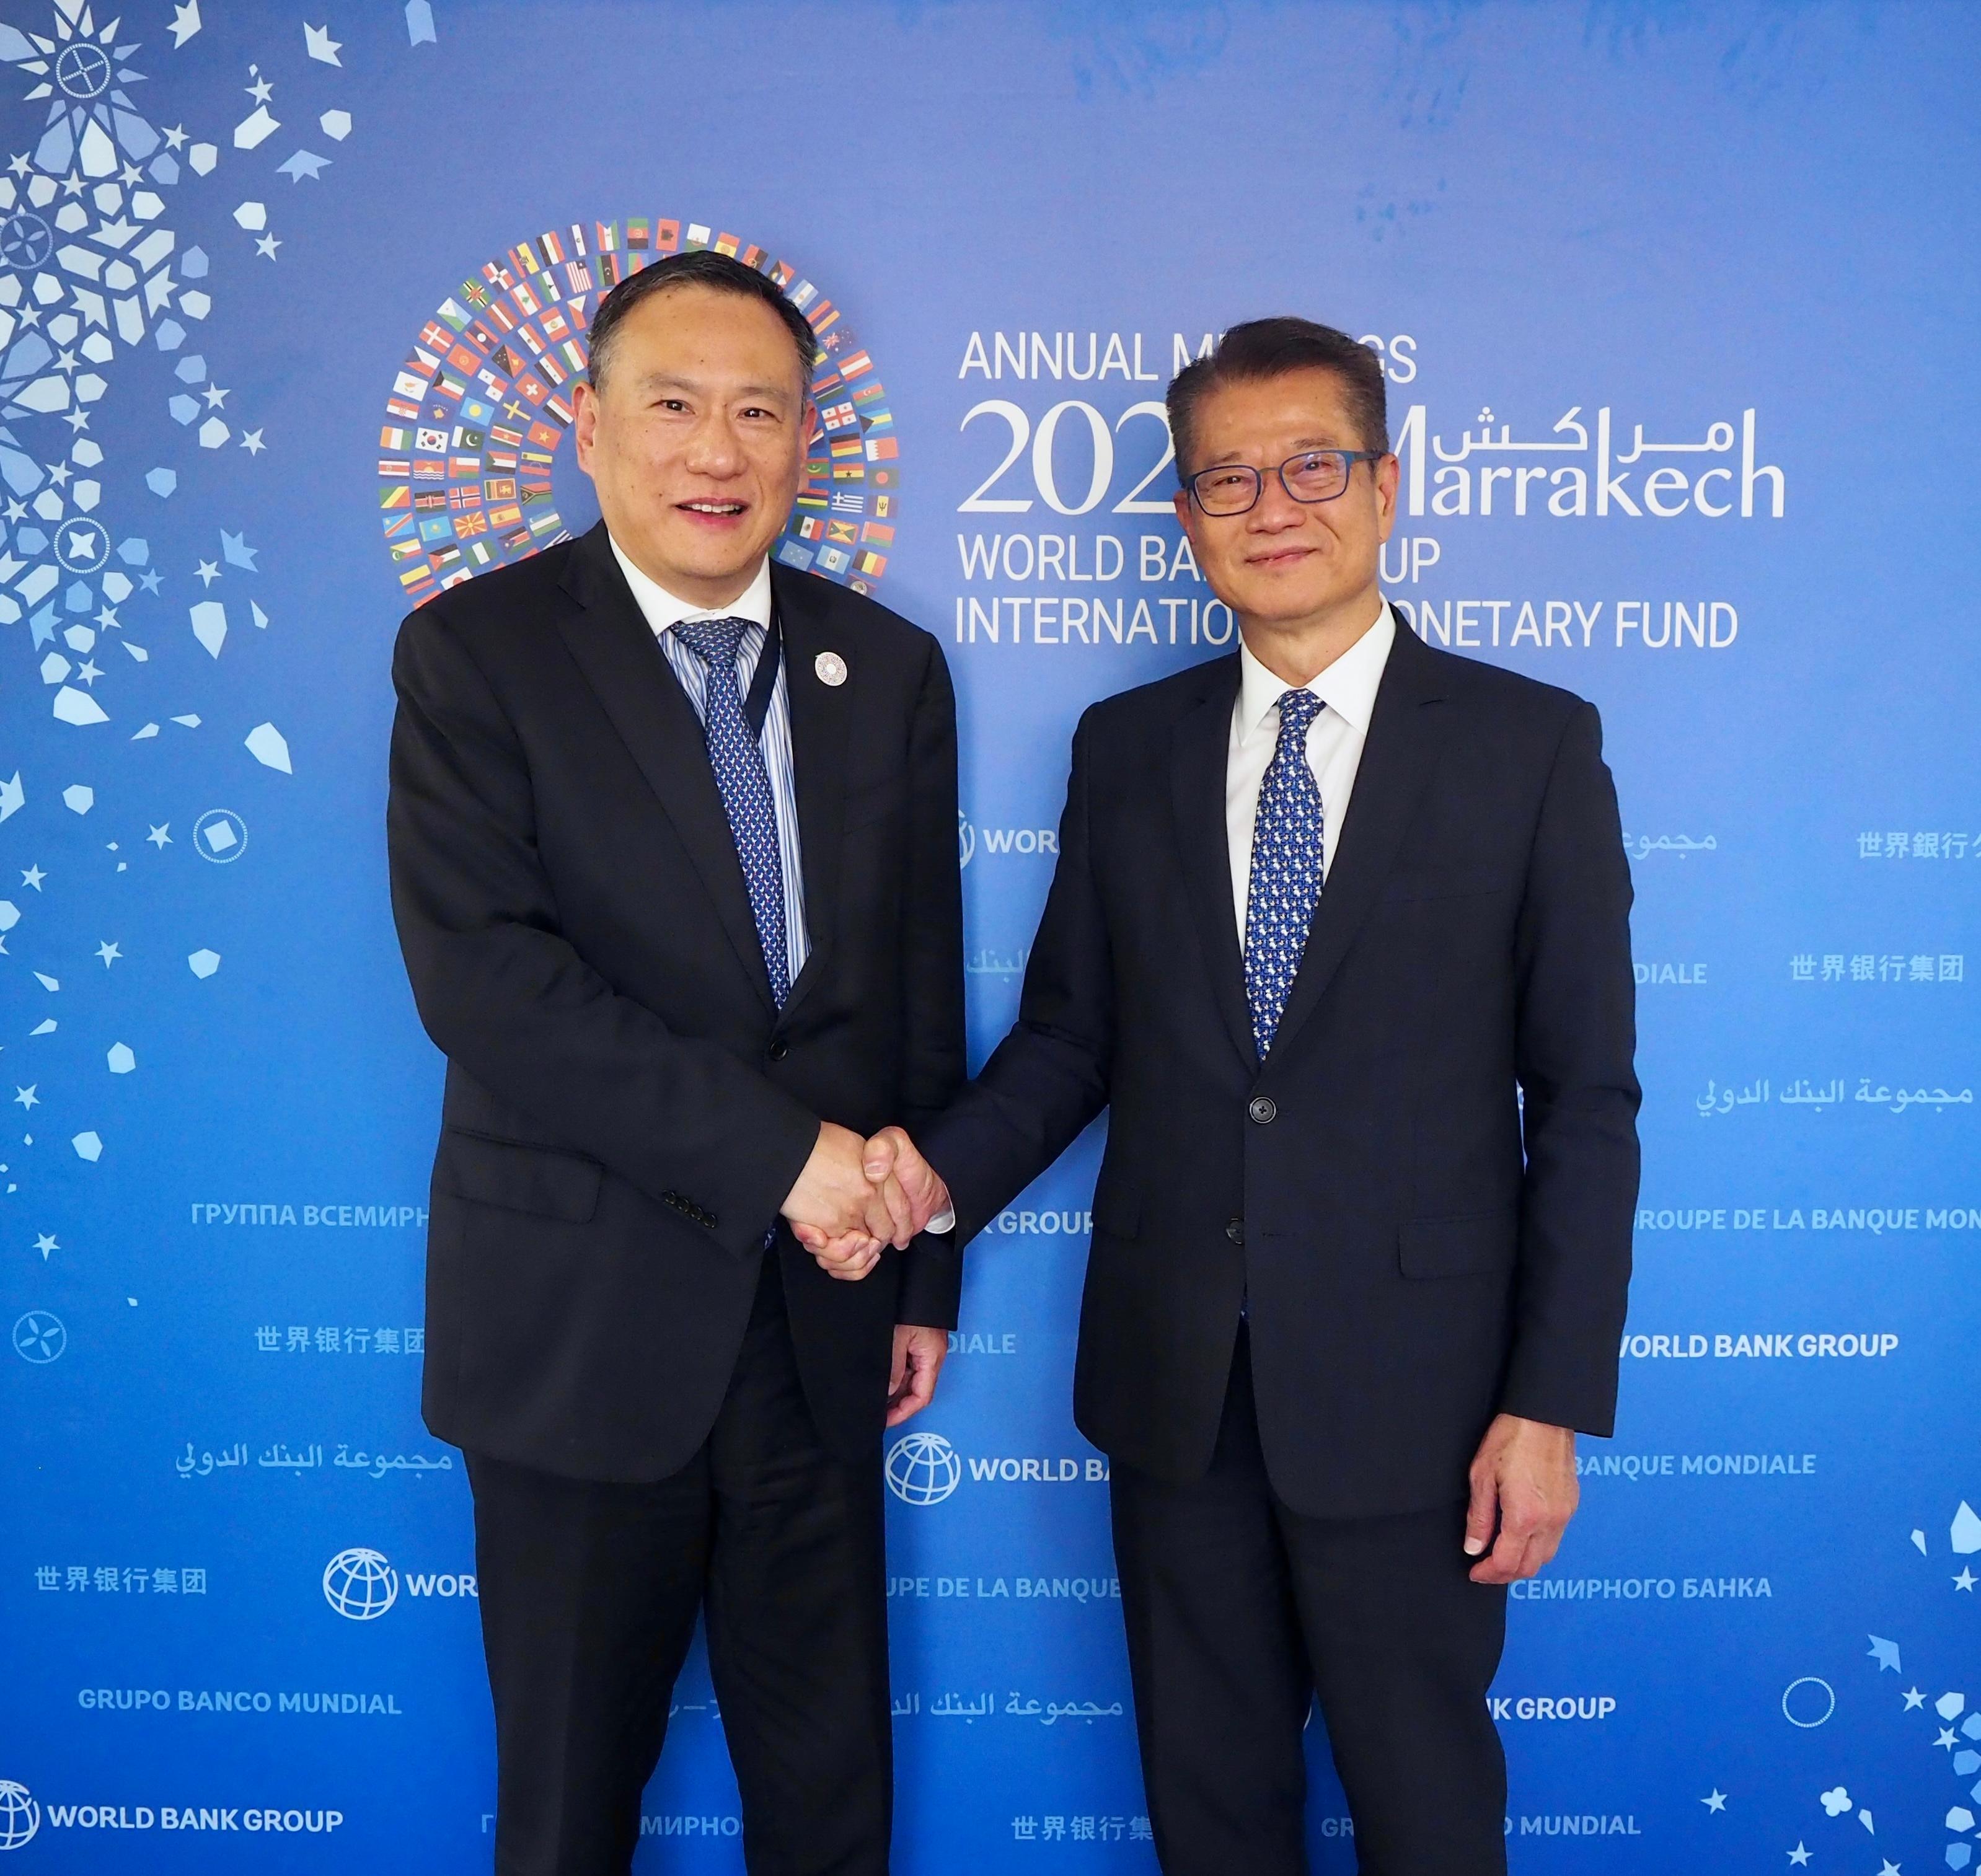 The Financial Secretary, Mr Paul Chan, attended the 2023 Annual Meetings of the International Monetary Fund and the World Bank Group (WBG) in Marrakech, Morocco, yesterday (October 13, Marrakech time), as a member of the Chinese delegation. Photo shows Mr Chan (right) meeting with the Managing Director and Chief Administrative Officer of the WBG, Mr Yang Shaolin (left).